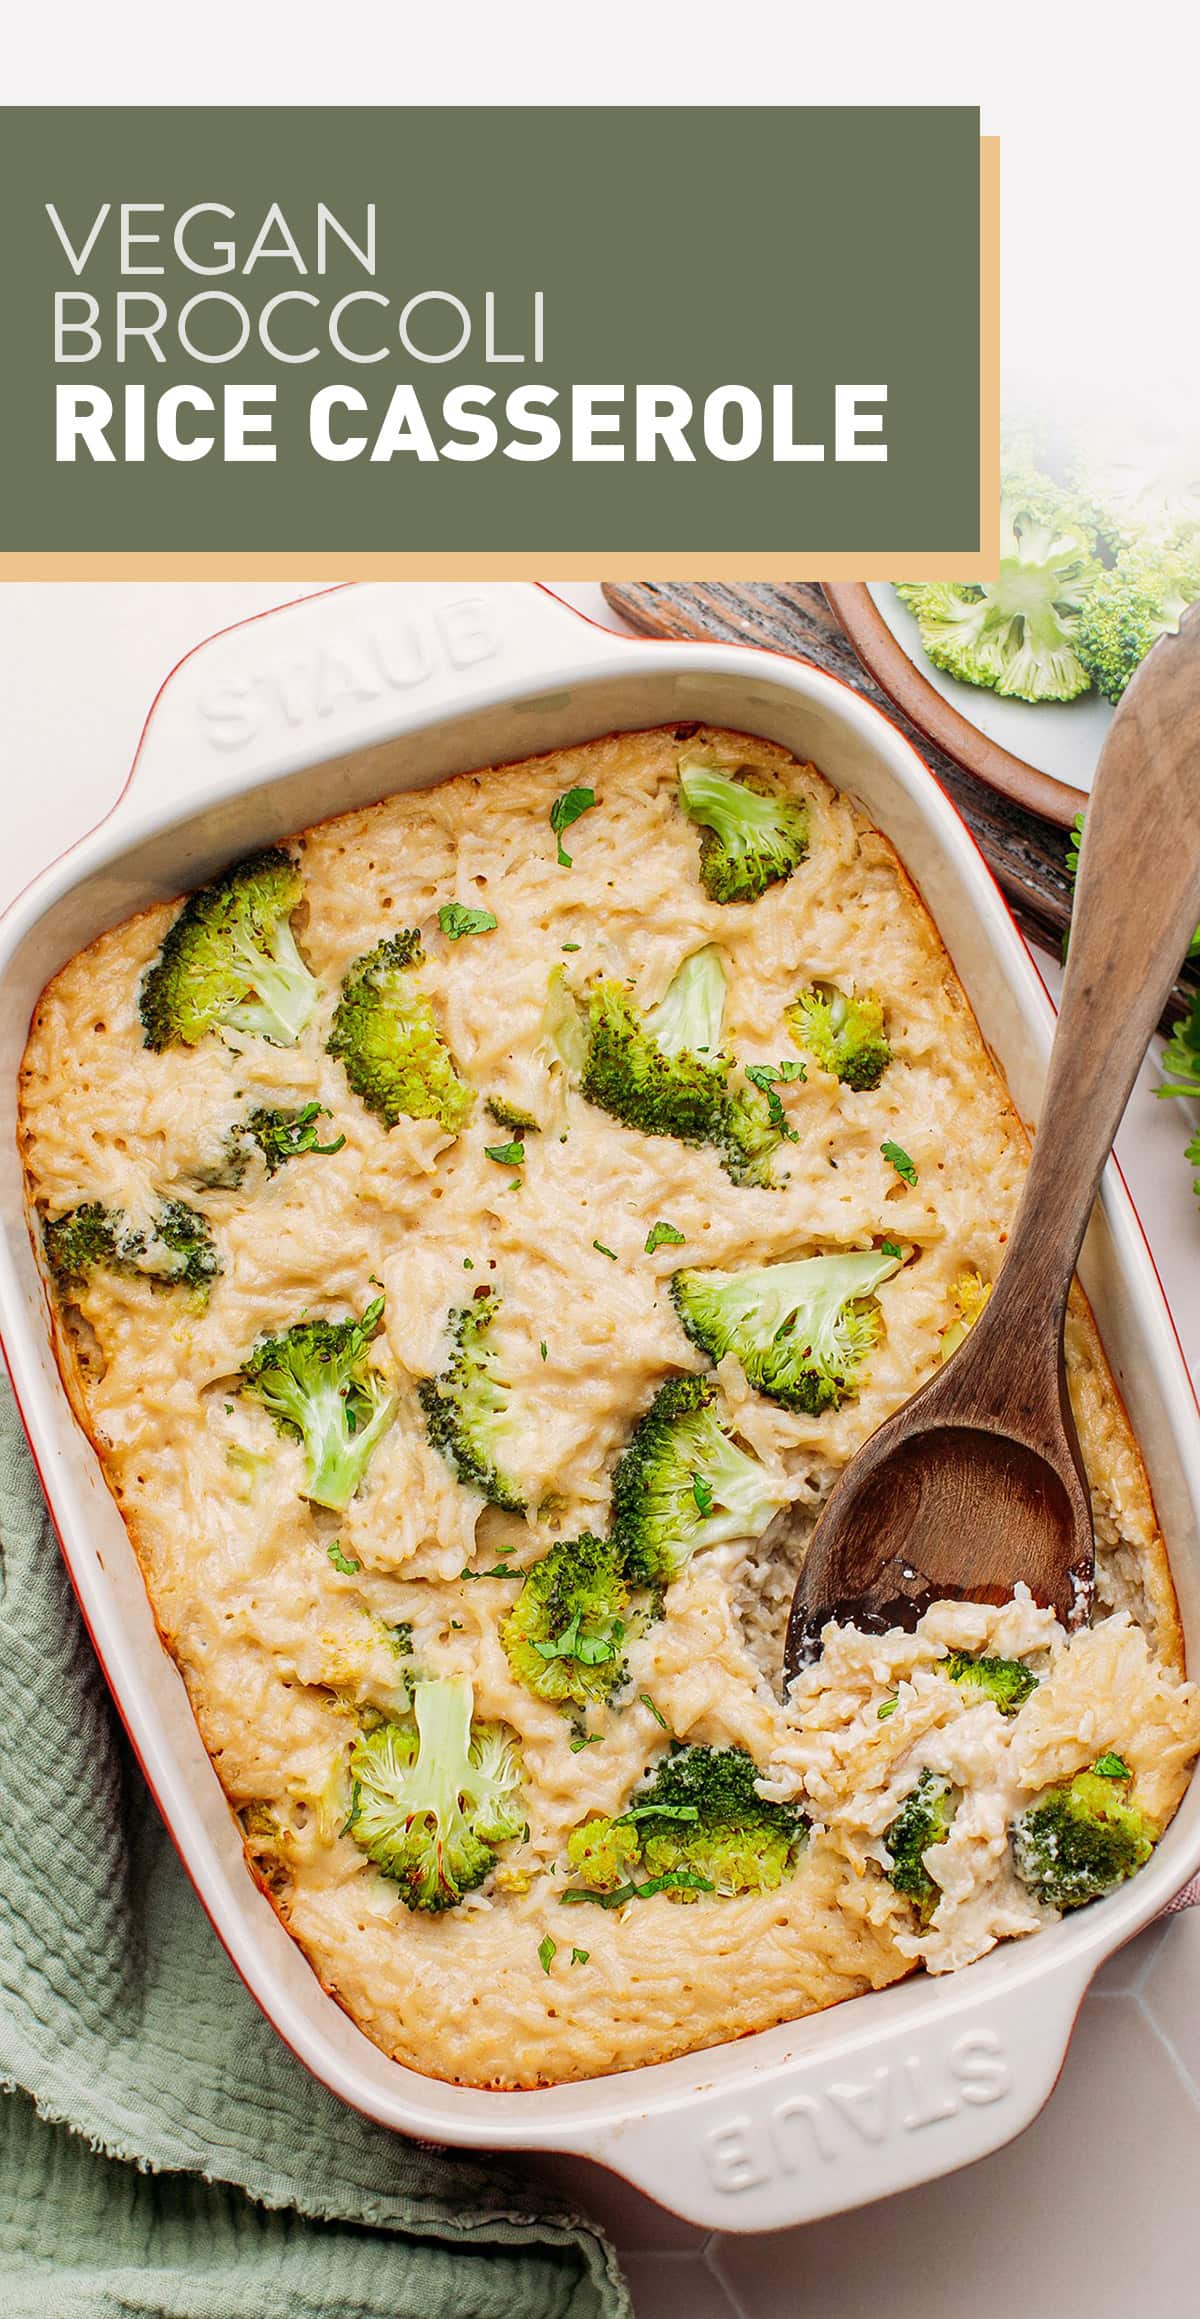 Introducing the ultimate vegan broccoli rice casserole! This simple casserole delivers plenty of cheese flavor, a super creamy consistency, and comes with an abundance of tender broccoli florets. A wonderful plant-based dish that will warm you up from the inside! #casserole #vegan